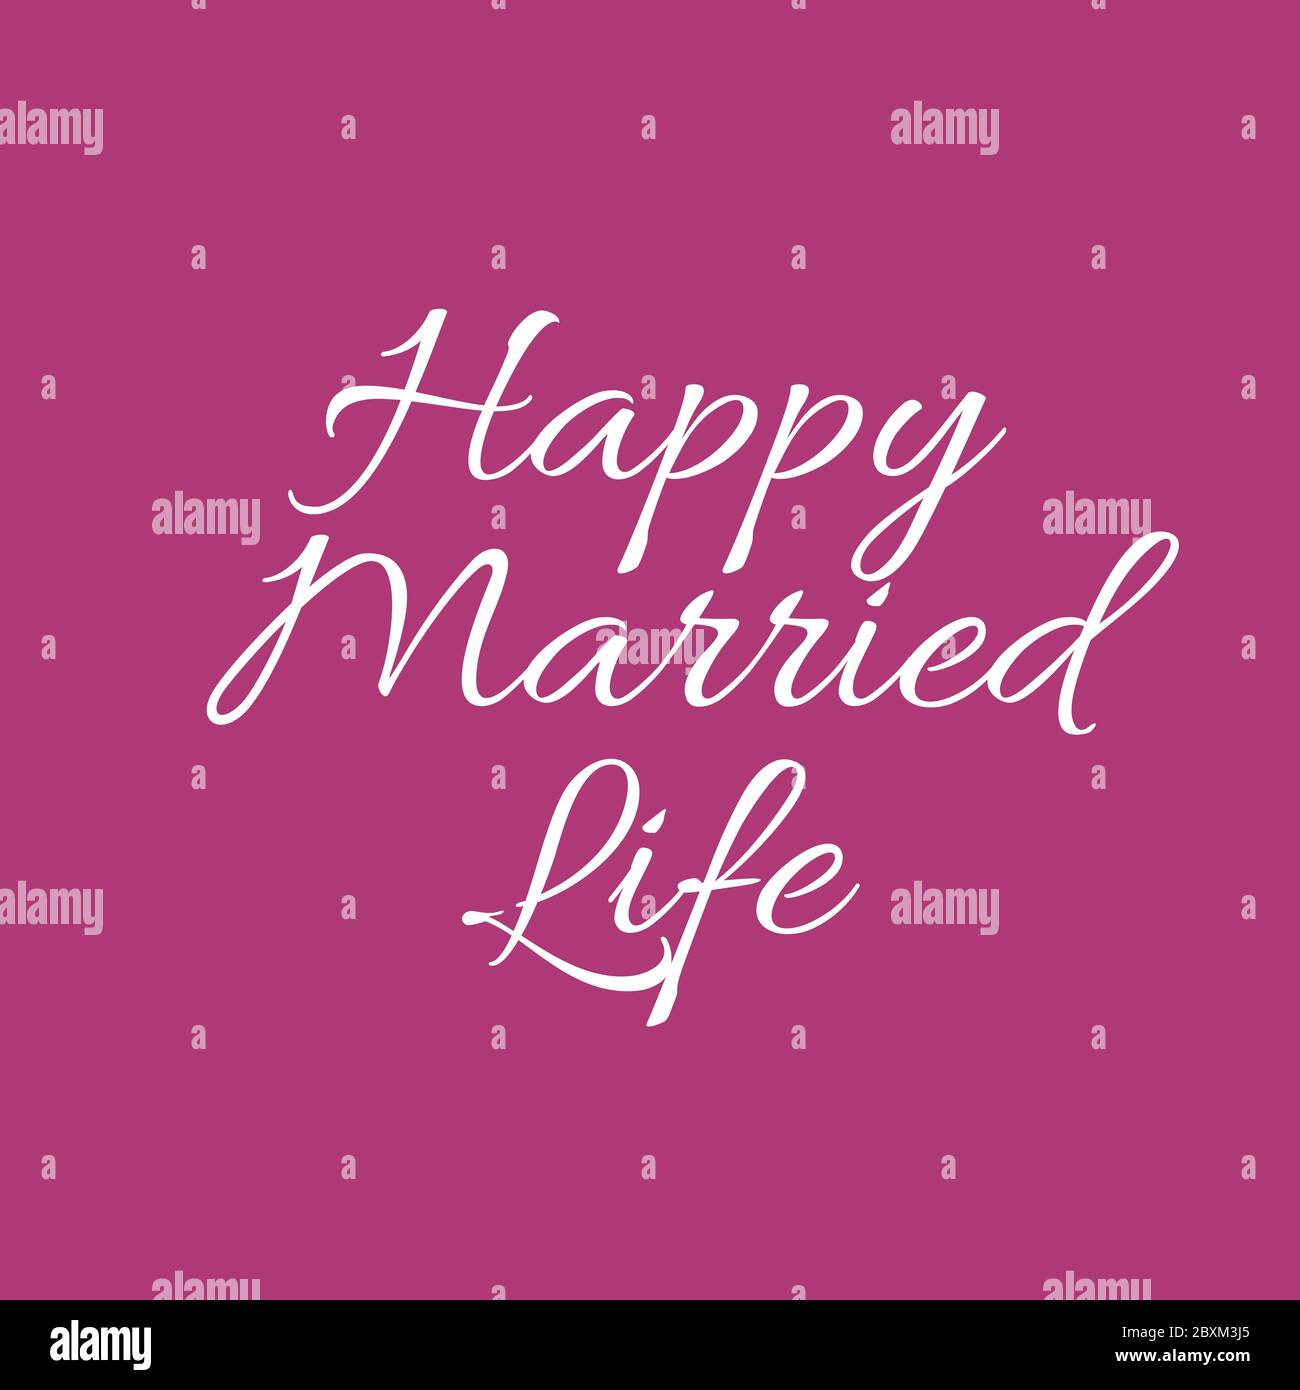 Happy married life card illustration for printing, decorations ...